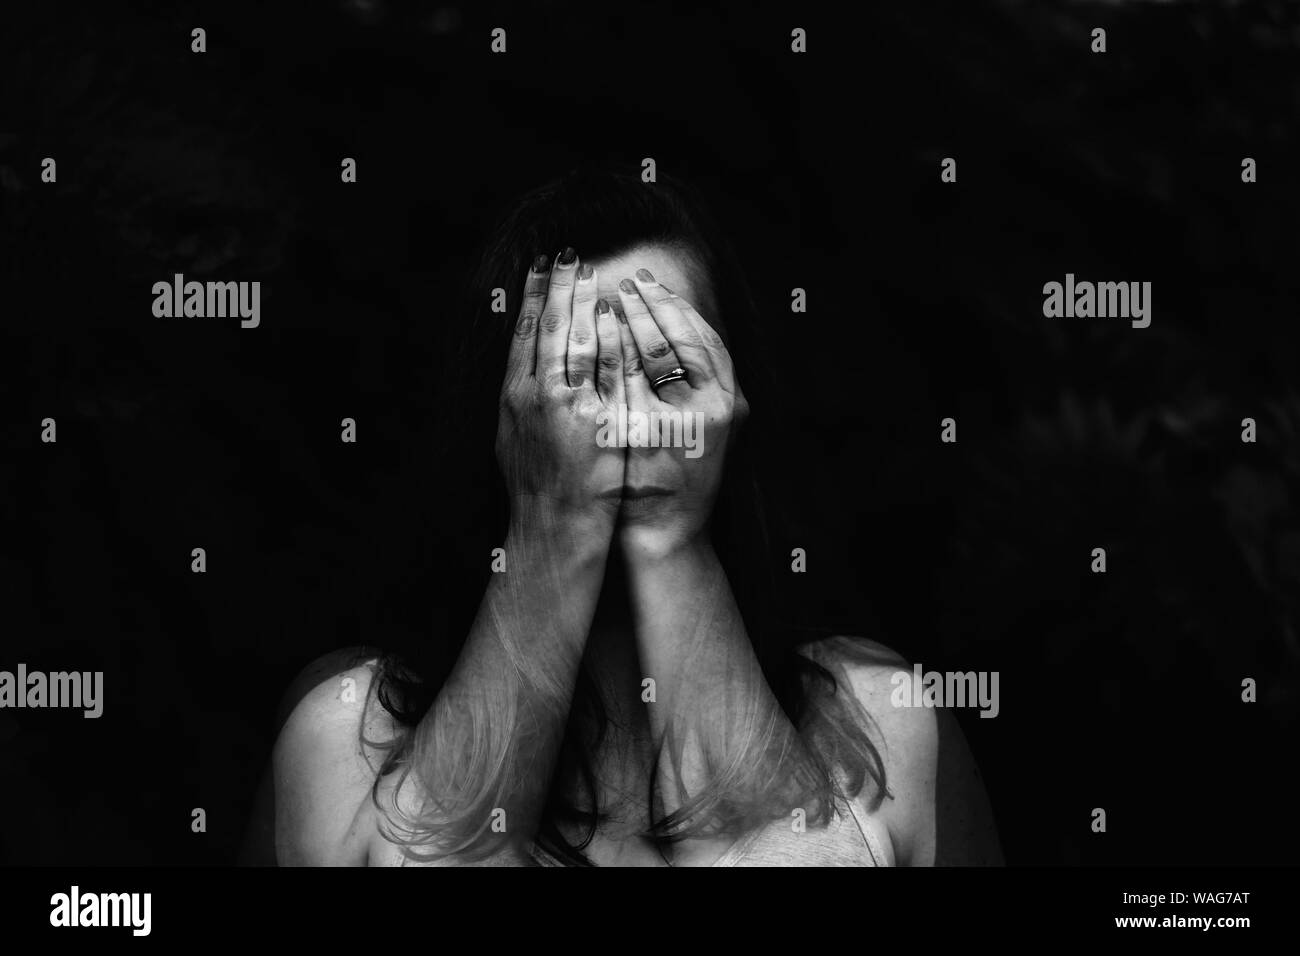 Double exposure portrait of female face hiding behind hands Stock Photo